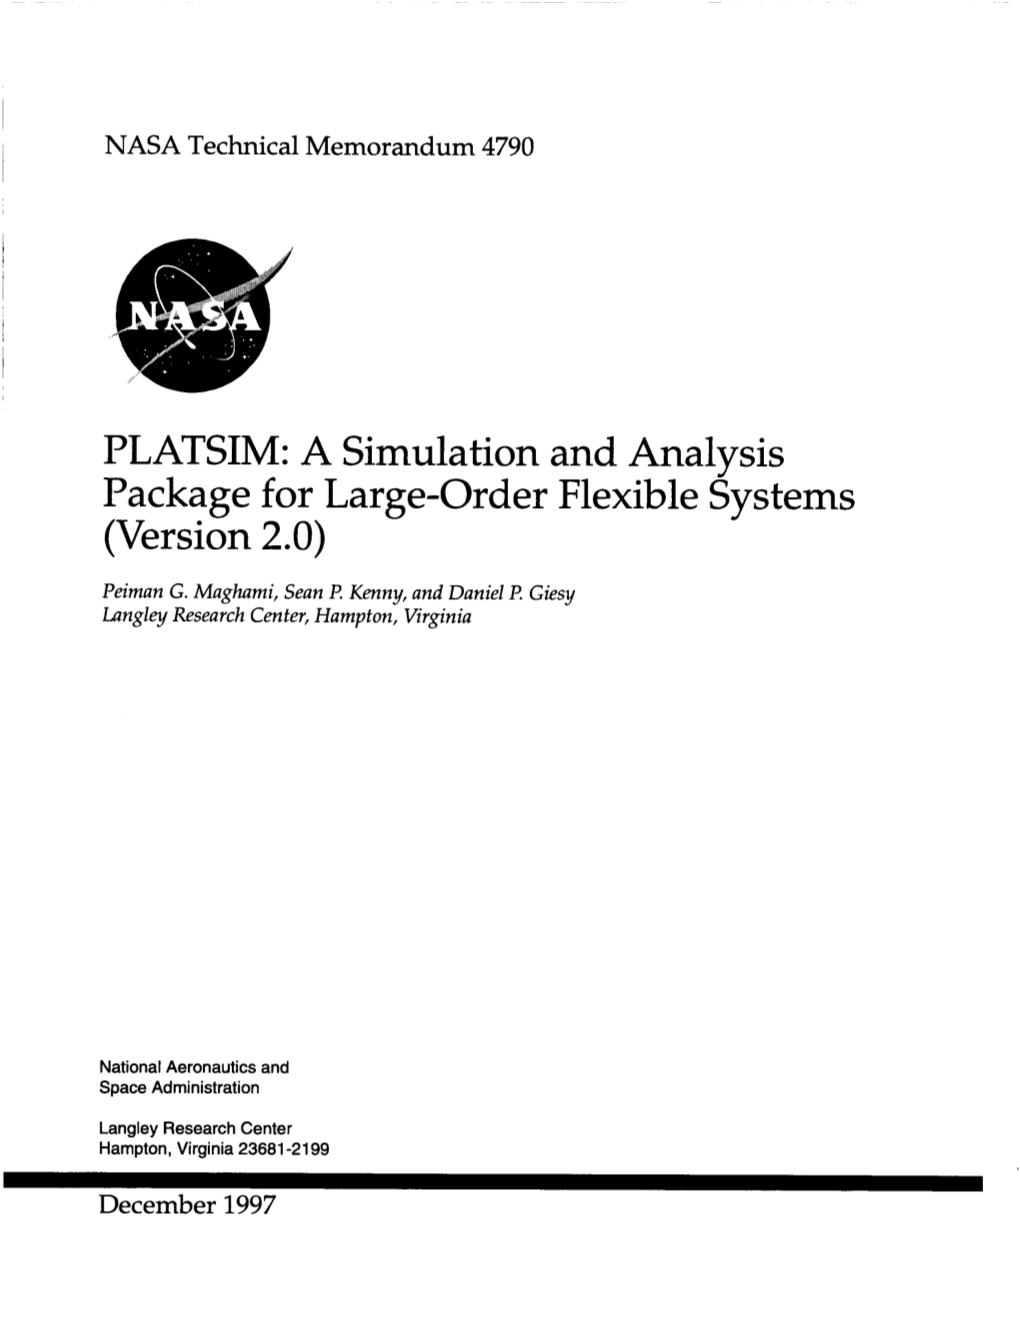 PLATSIM: a Simulation and Analysis Package for Large-Order Flexible Systems (Version 2.0)